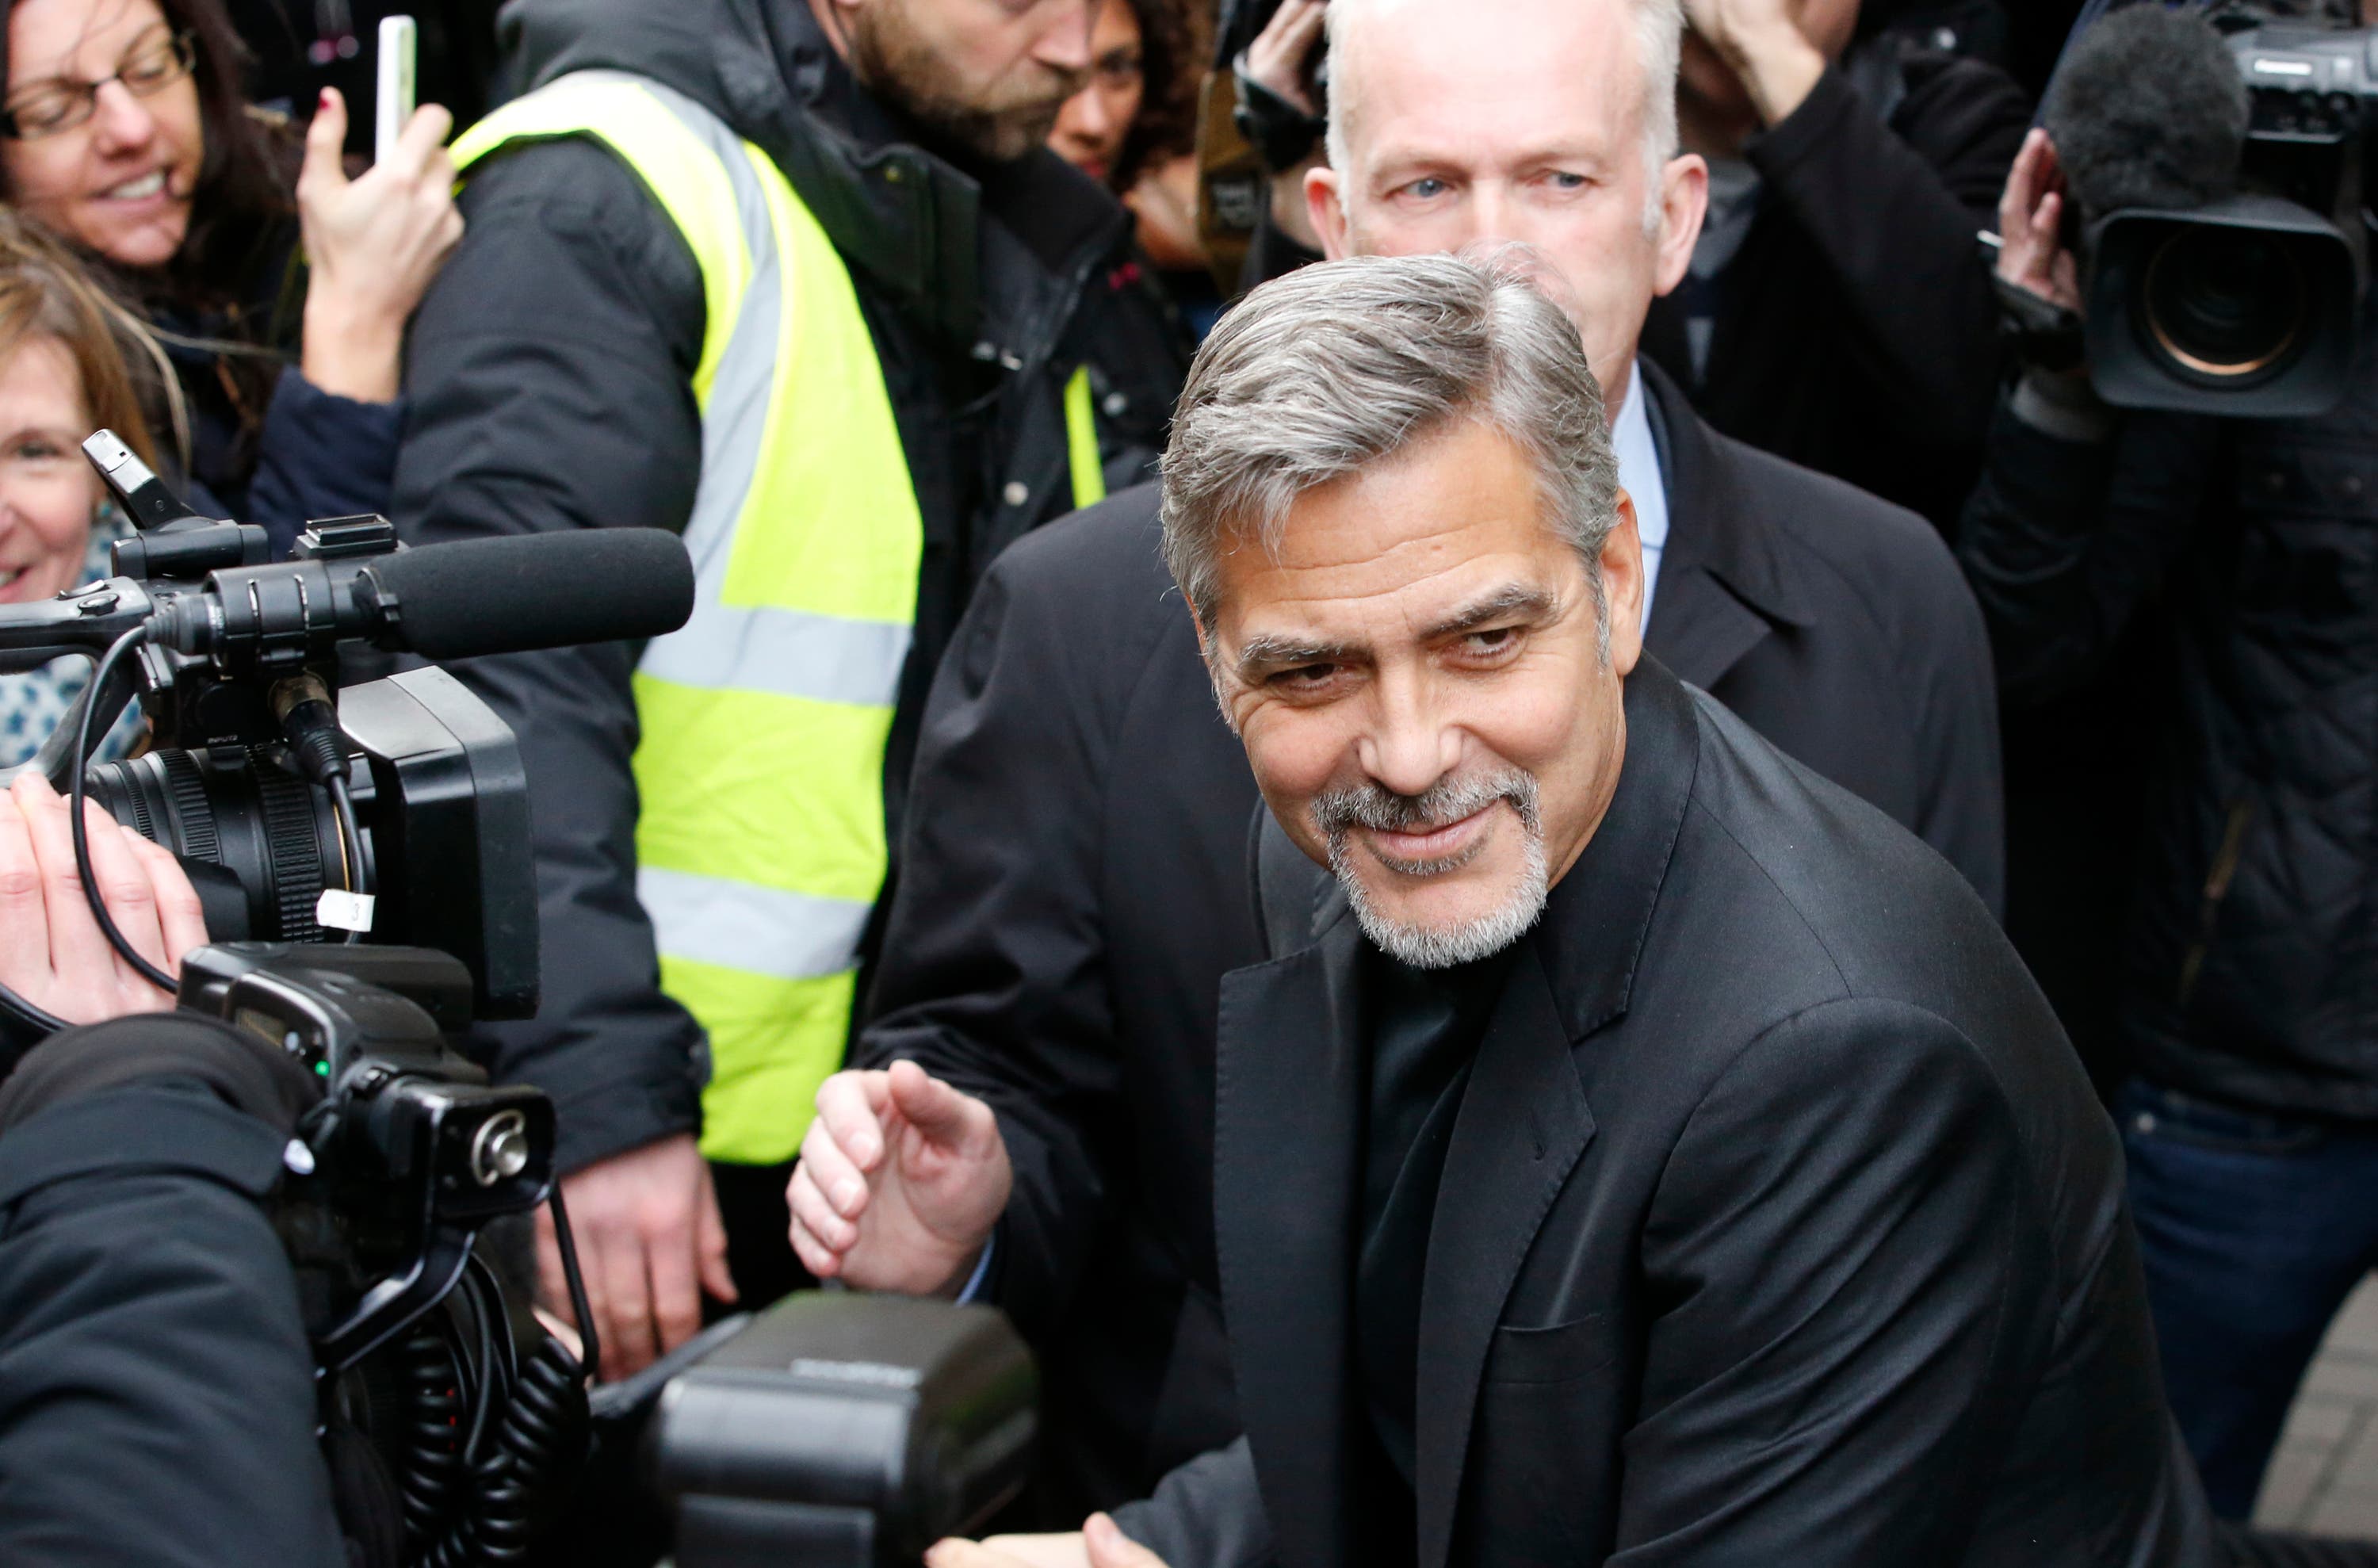 Hollywood star George Clooney supported Social Bite when he visited Scotland in 2015.